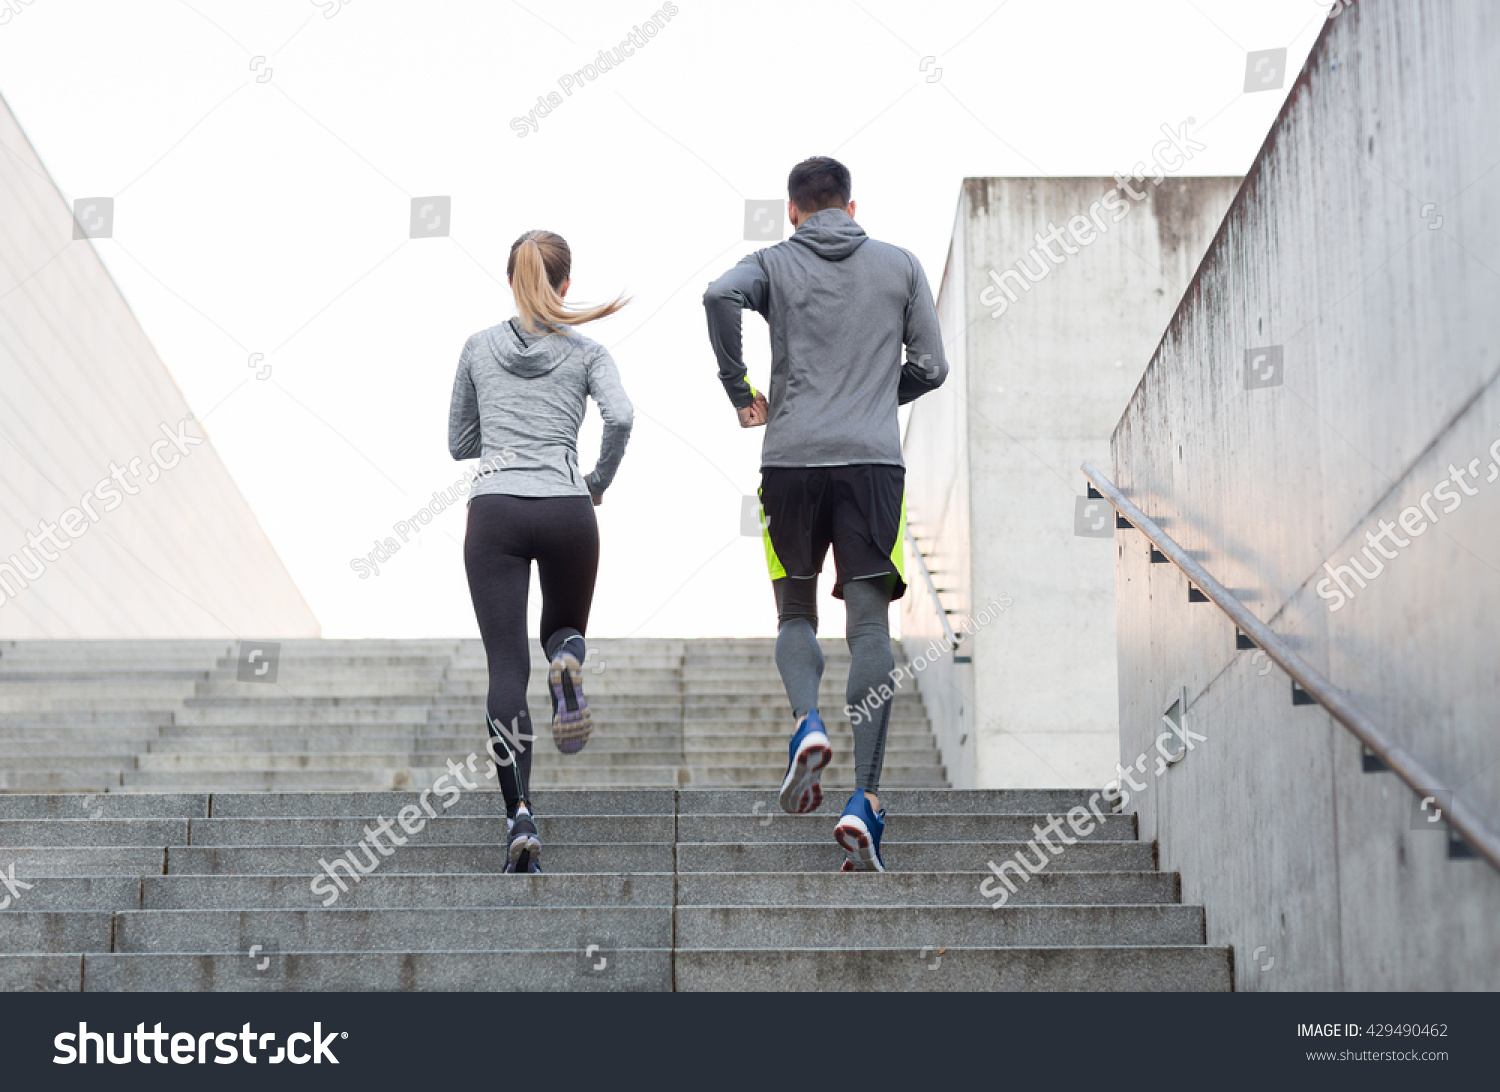 fitness, sport, people, exercising and lifestyle concept - couple running upstairs on city stairs #429490462